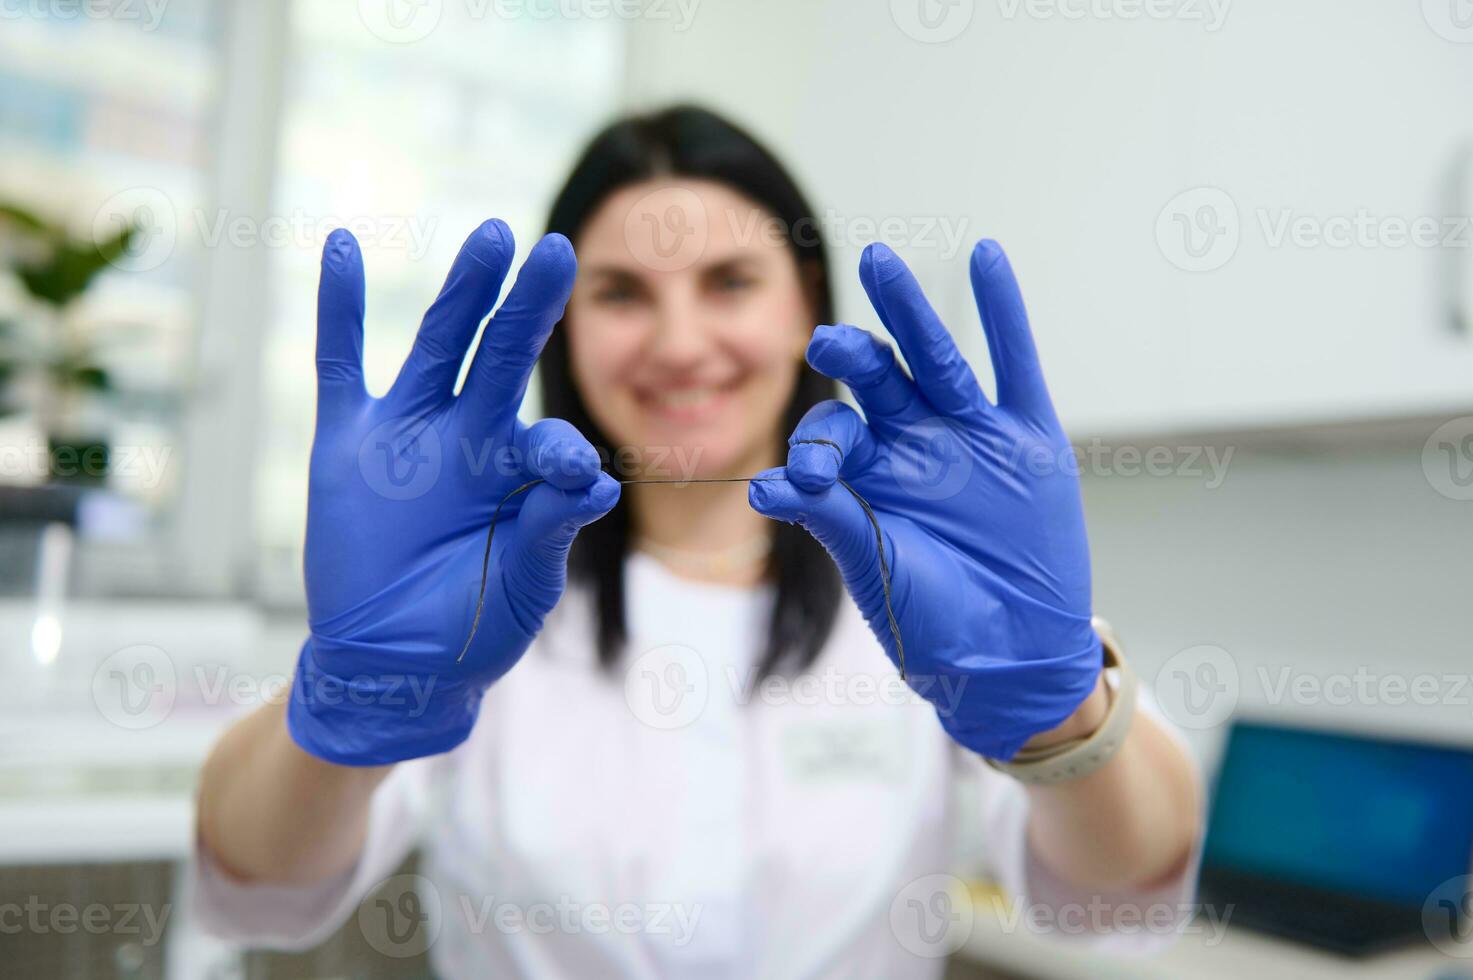 Focus on dental floss for oral hygiene and dental care in the hands of a blurred smiling female dentist doctor hygienist photo